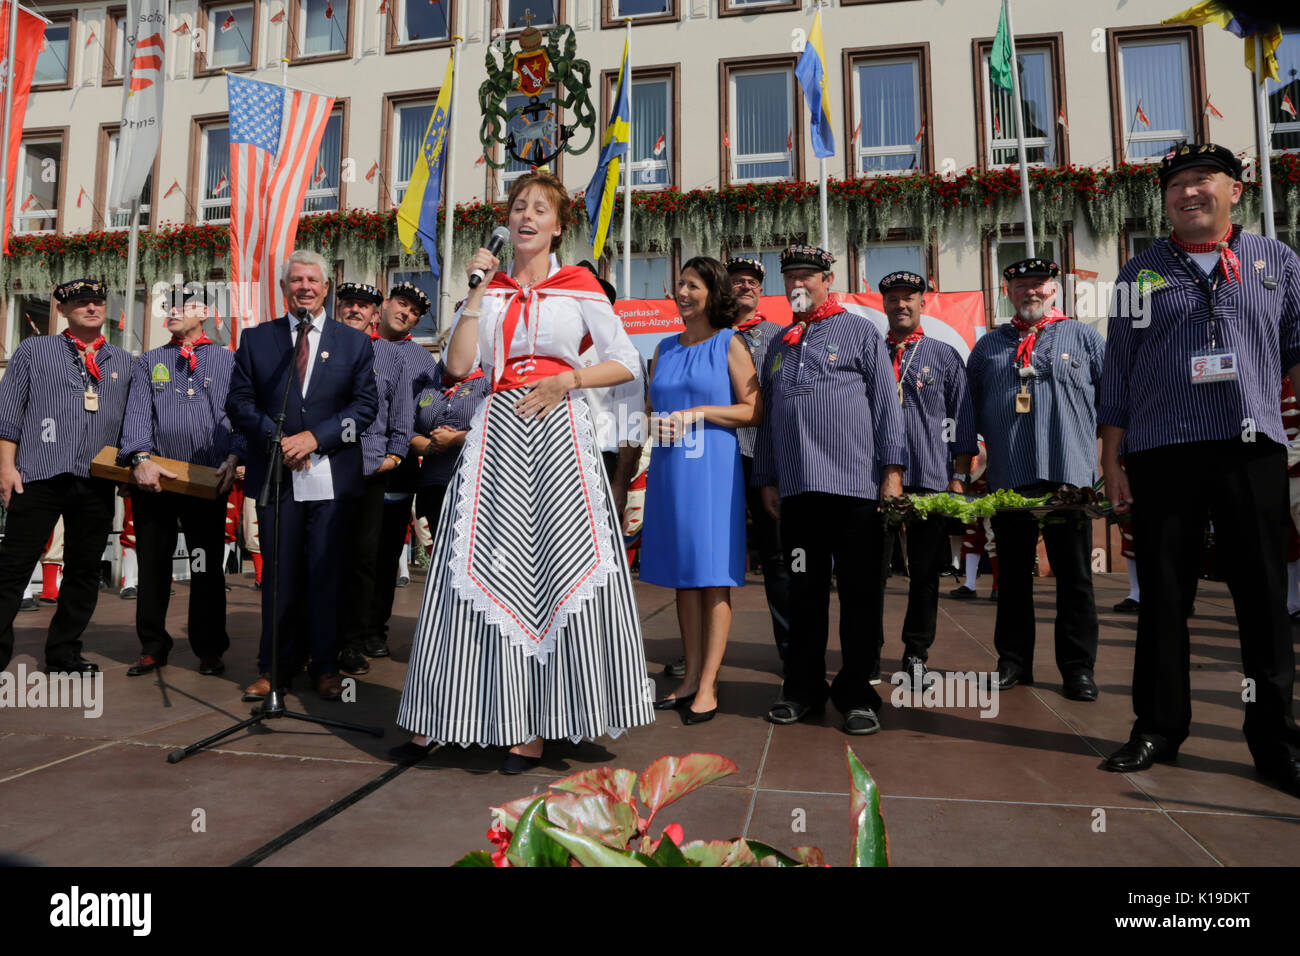 Worms, Germany. 26th August 2017. The bride of the BojemŠŠschter vun de FischerwŠŠd (mayor of the fishermenÕs lea), Franziska Henrici, addresses the opening ceremony. The representatives of the old fishermen's Guild of Worms stand behind her. The largest wine and funfair along the Rhine, the Backfischfest started in Worms with the traditional handing over of power from the Lord Mayor to the mayor of the fishermenÕs lea. The ceremony was framed by dances and music. Secretary of state Daniela Schmitt from the Rhineland-Palatinate ministry for economy, transport, agriculture and viticulture atten Stock Photo